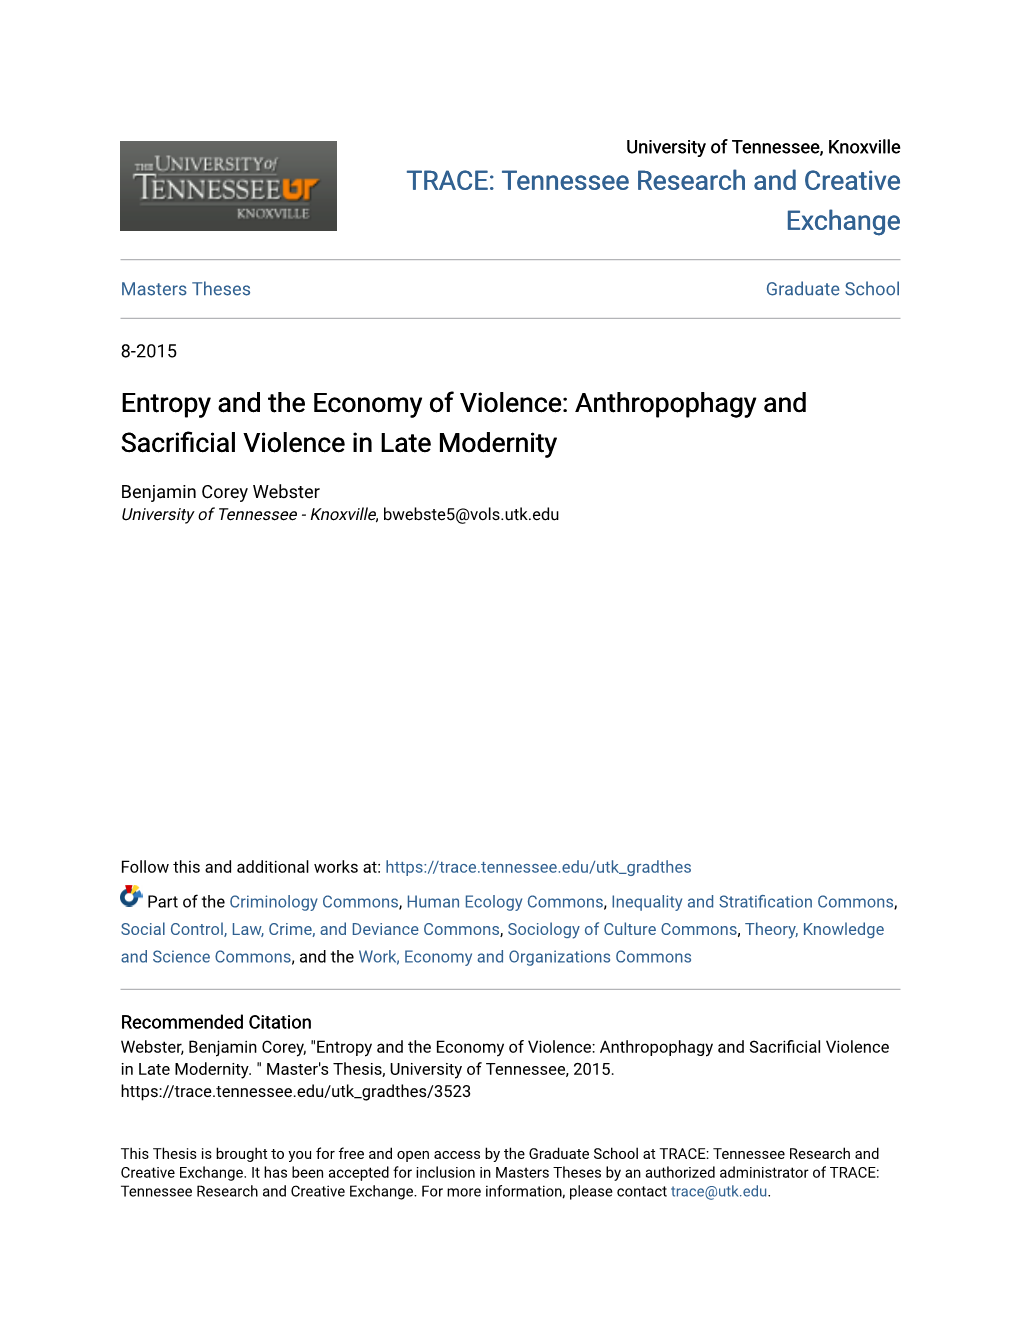 Entropy and the Economy of Violence: Anthropophagy and Sacrificial Violence in Late Modernity